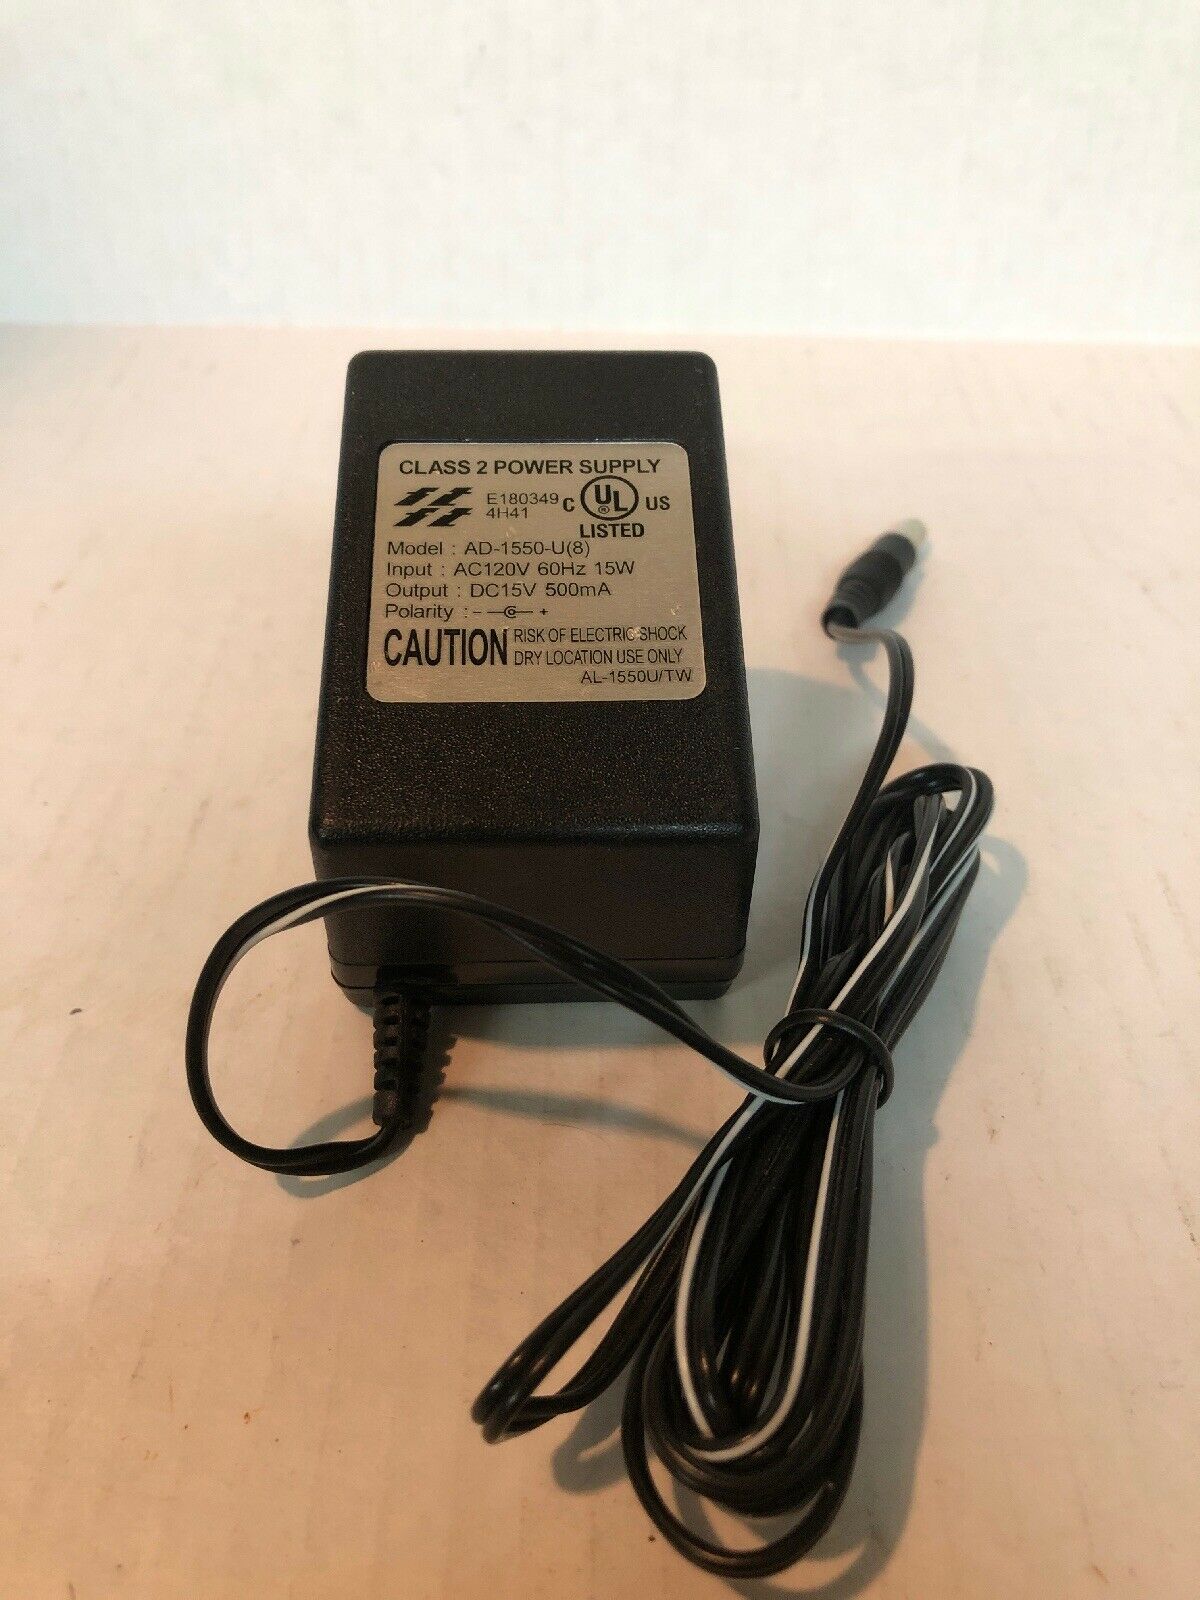 NEW AD-1550-U(8) 15V DC 500mA Class 2 Power Supply AC Adapter Charger Power Cord